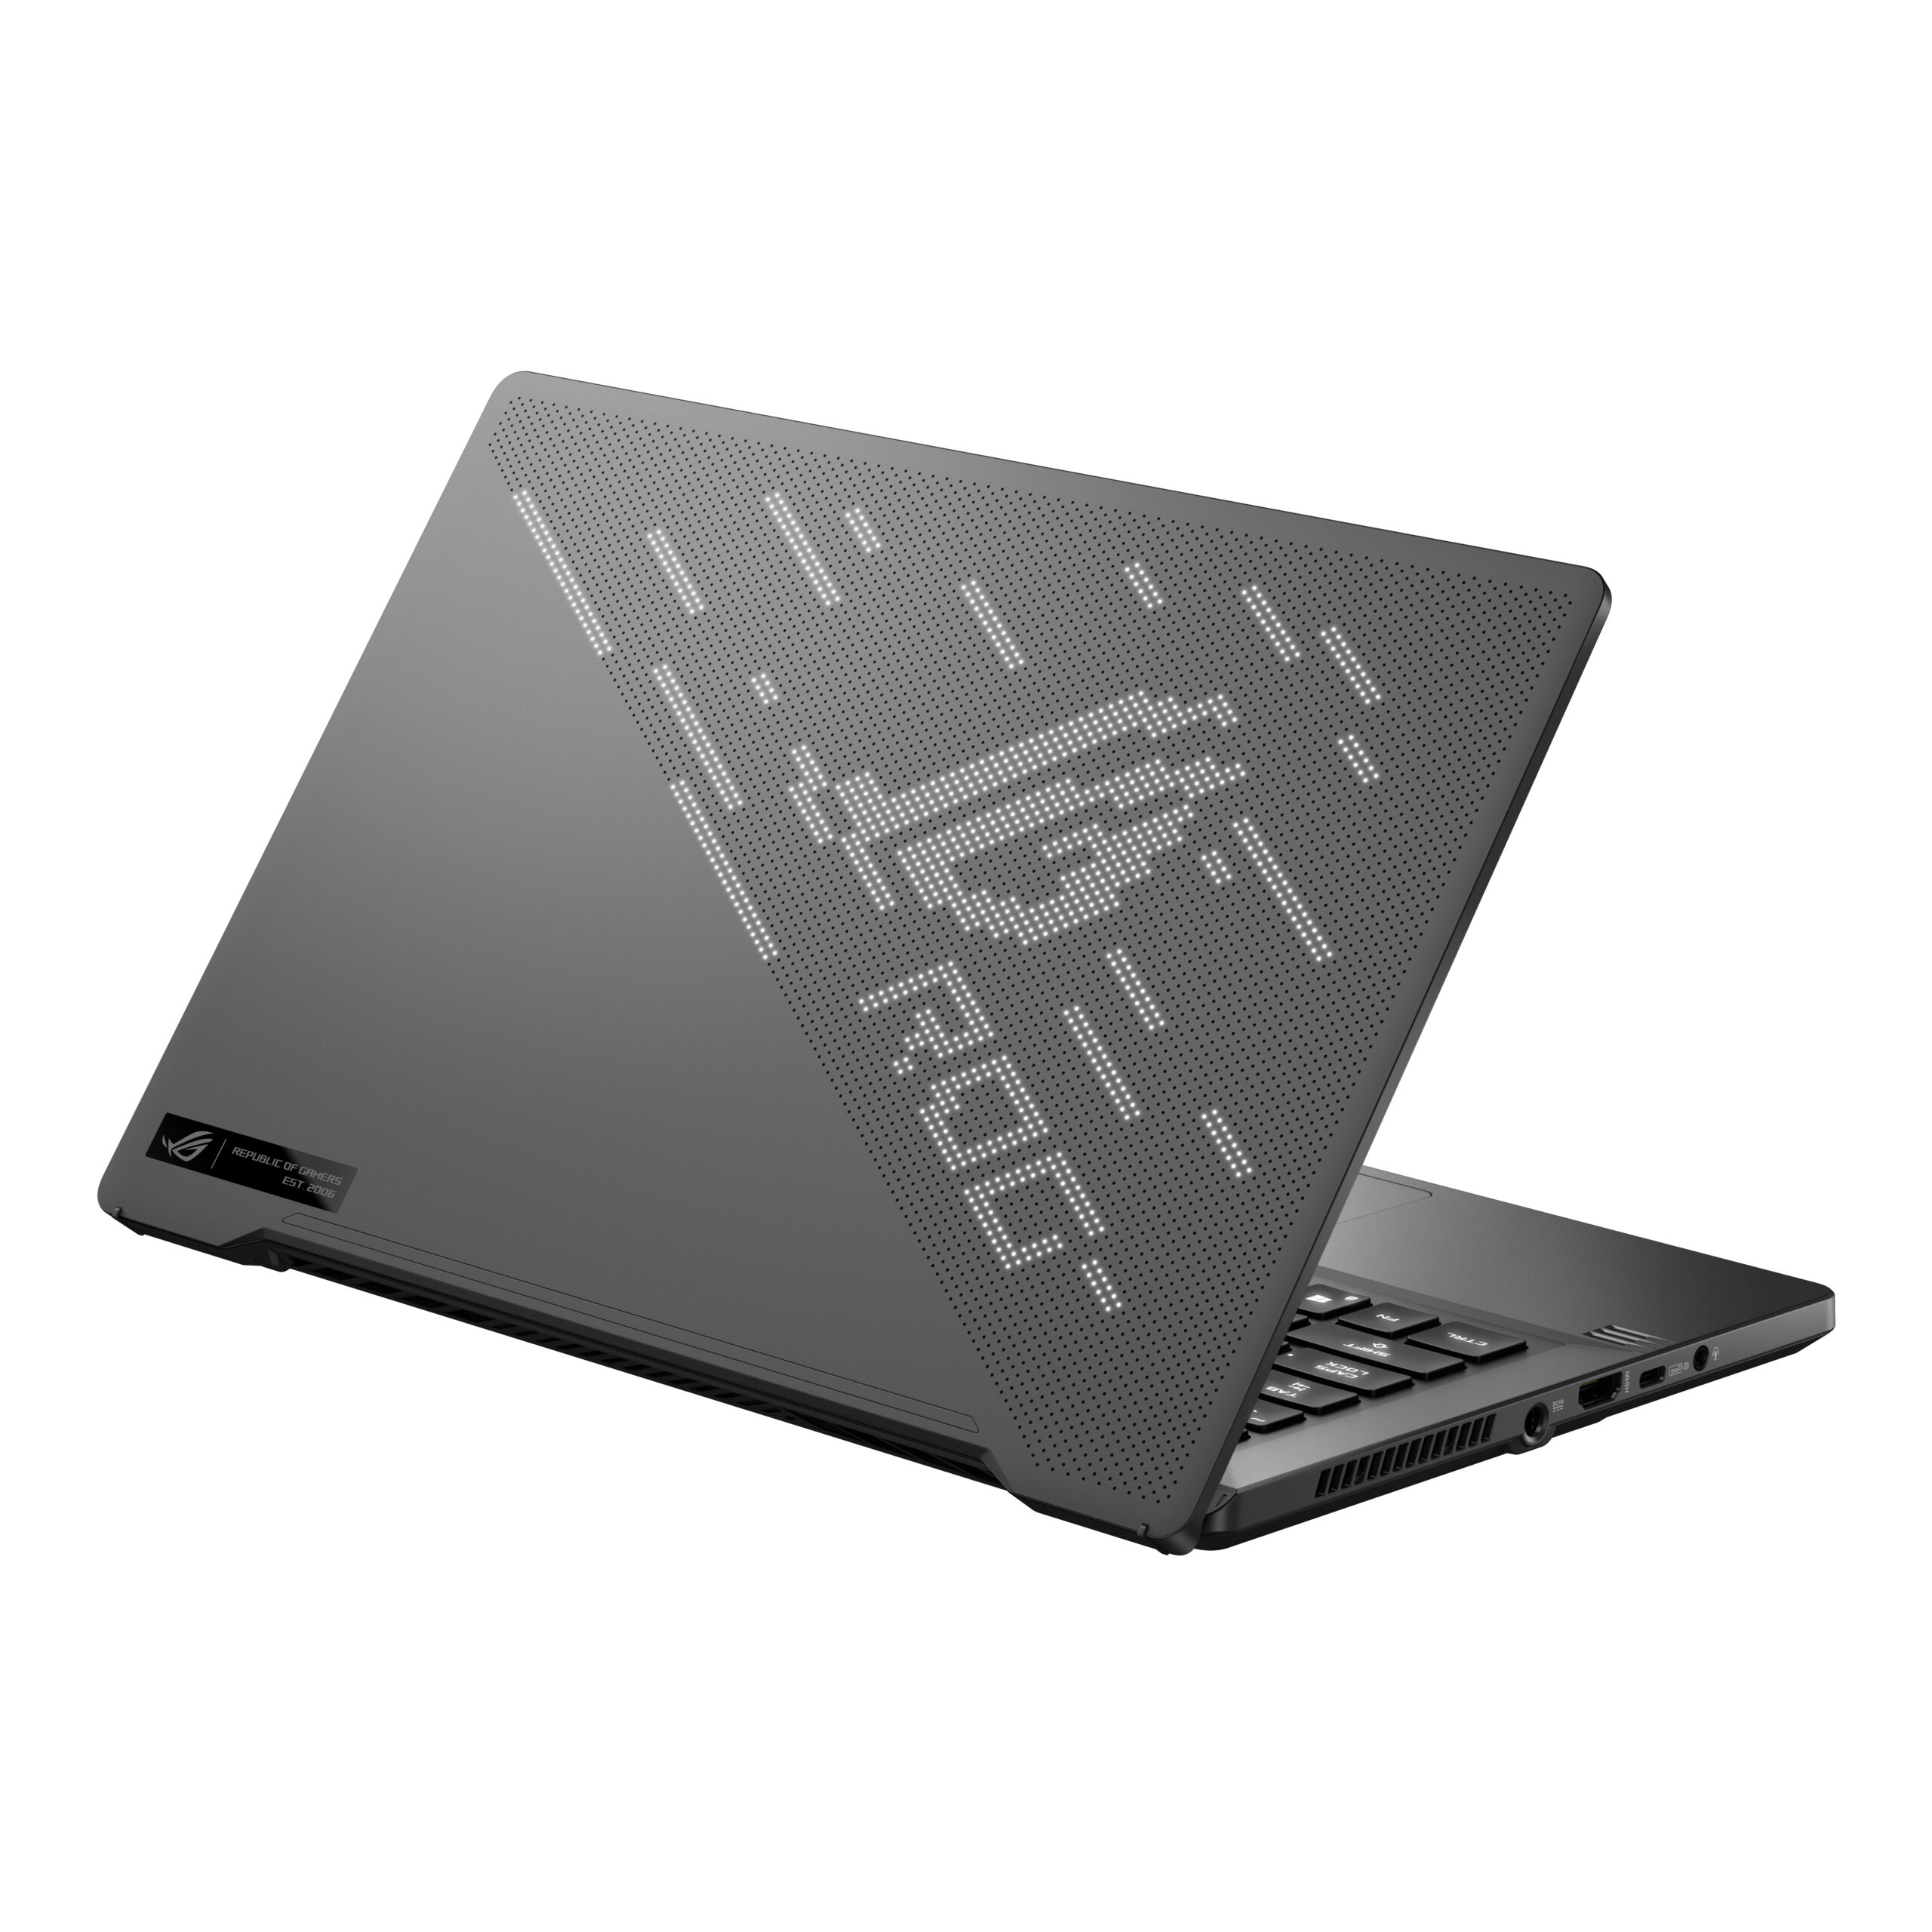 CES 2020: ASUS ROG Zephyrus G14 and G15 Gaming Laptop 12